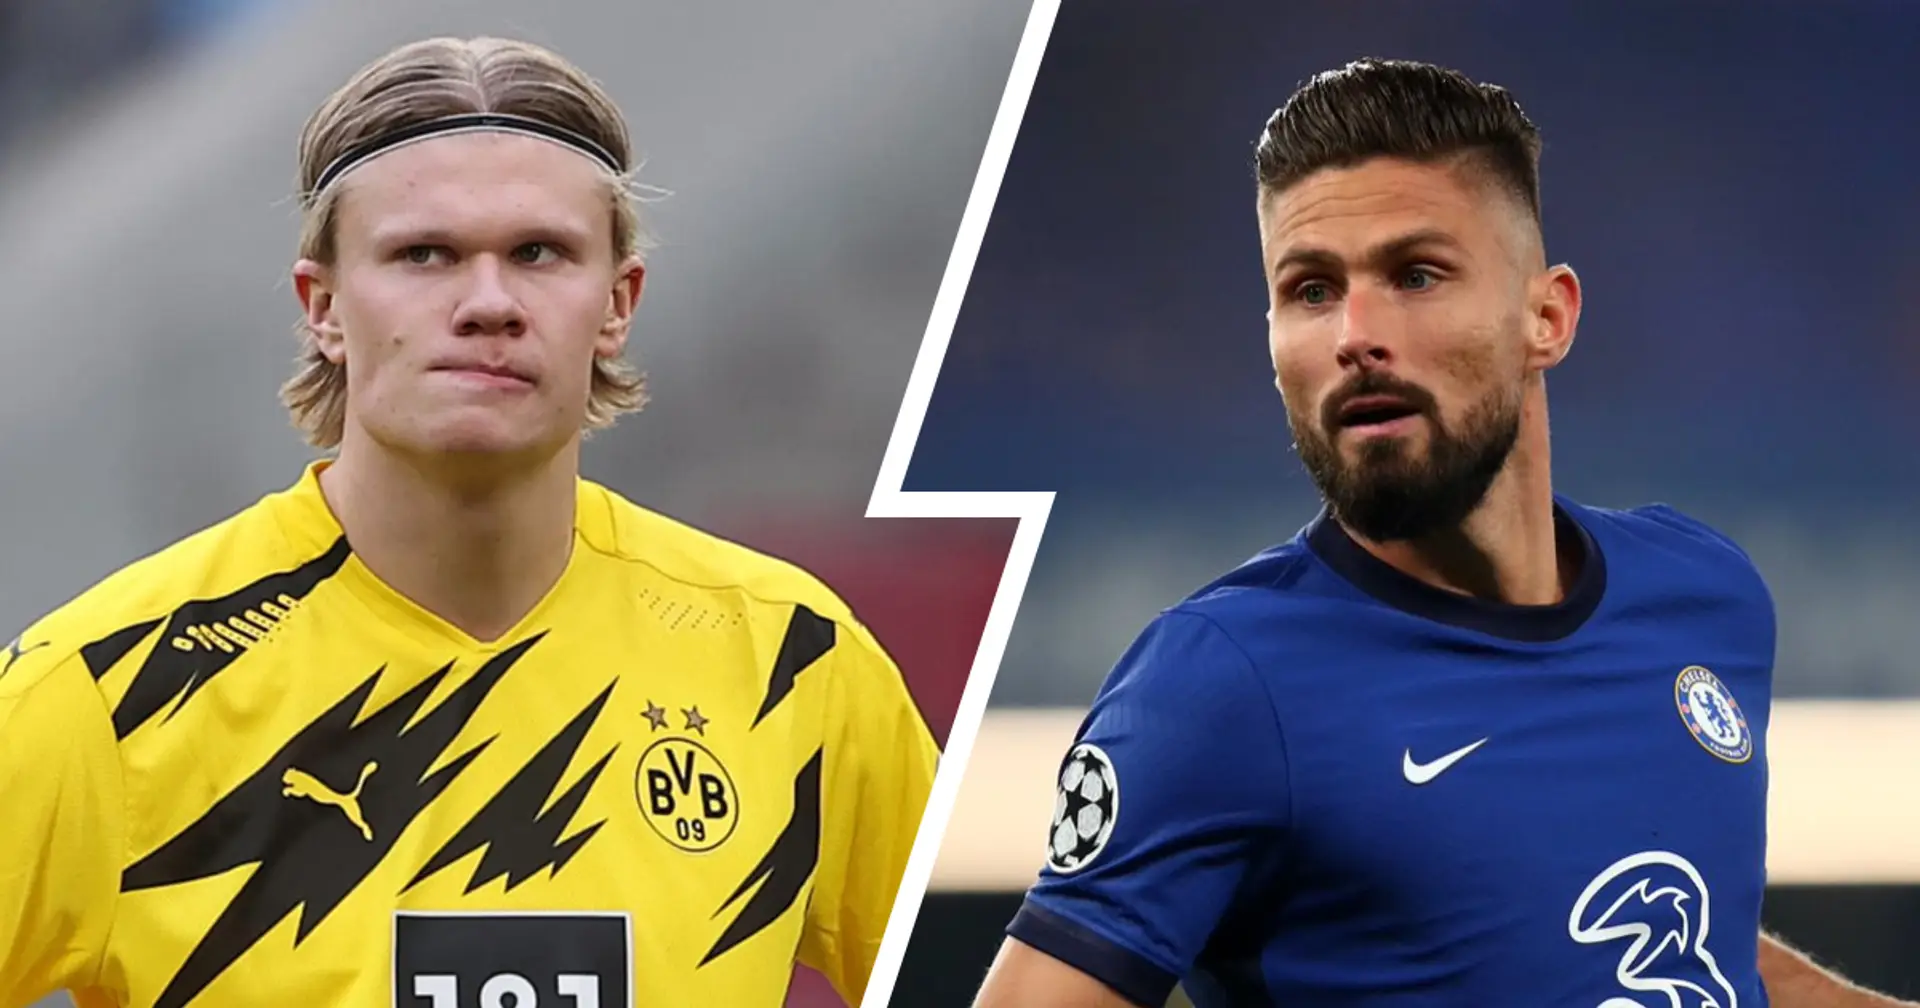 New updates on Haaland and Giroud: Latest Chelsea transfer round-up with probability ratings